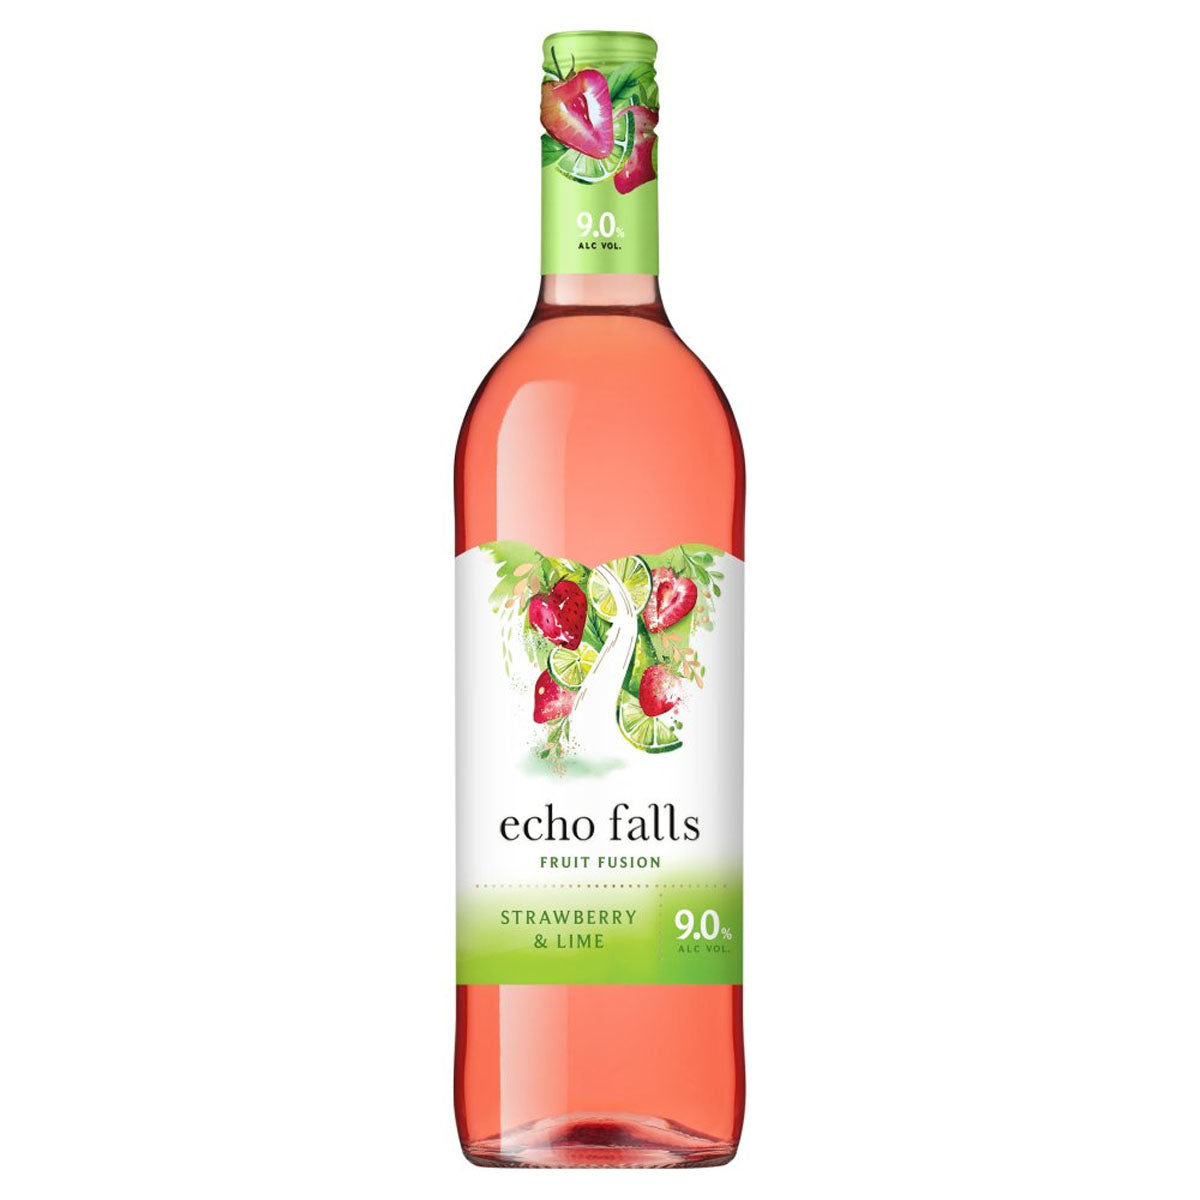 A bottle of Echo Falls - Strawberry & Lime Fruit Fusion (9.0% ABV) - 750ml wine with a label on it.